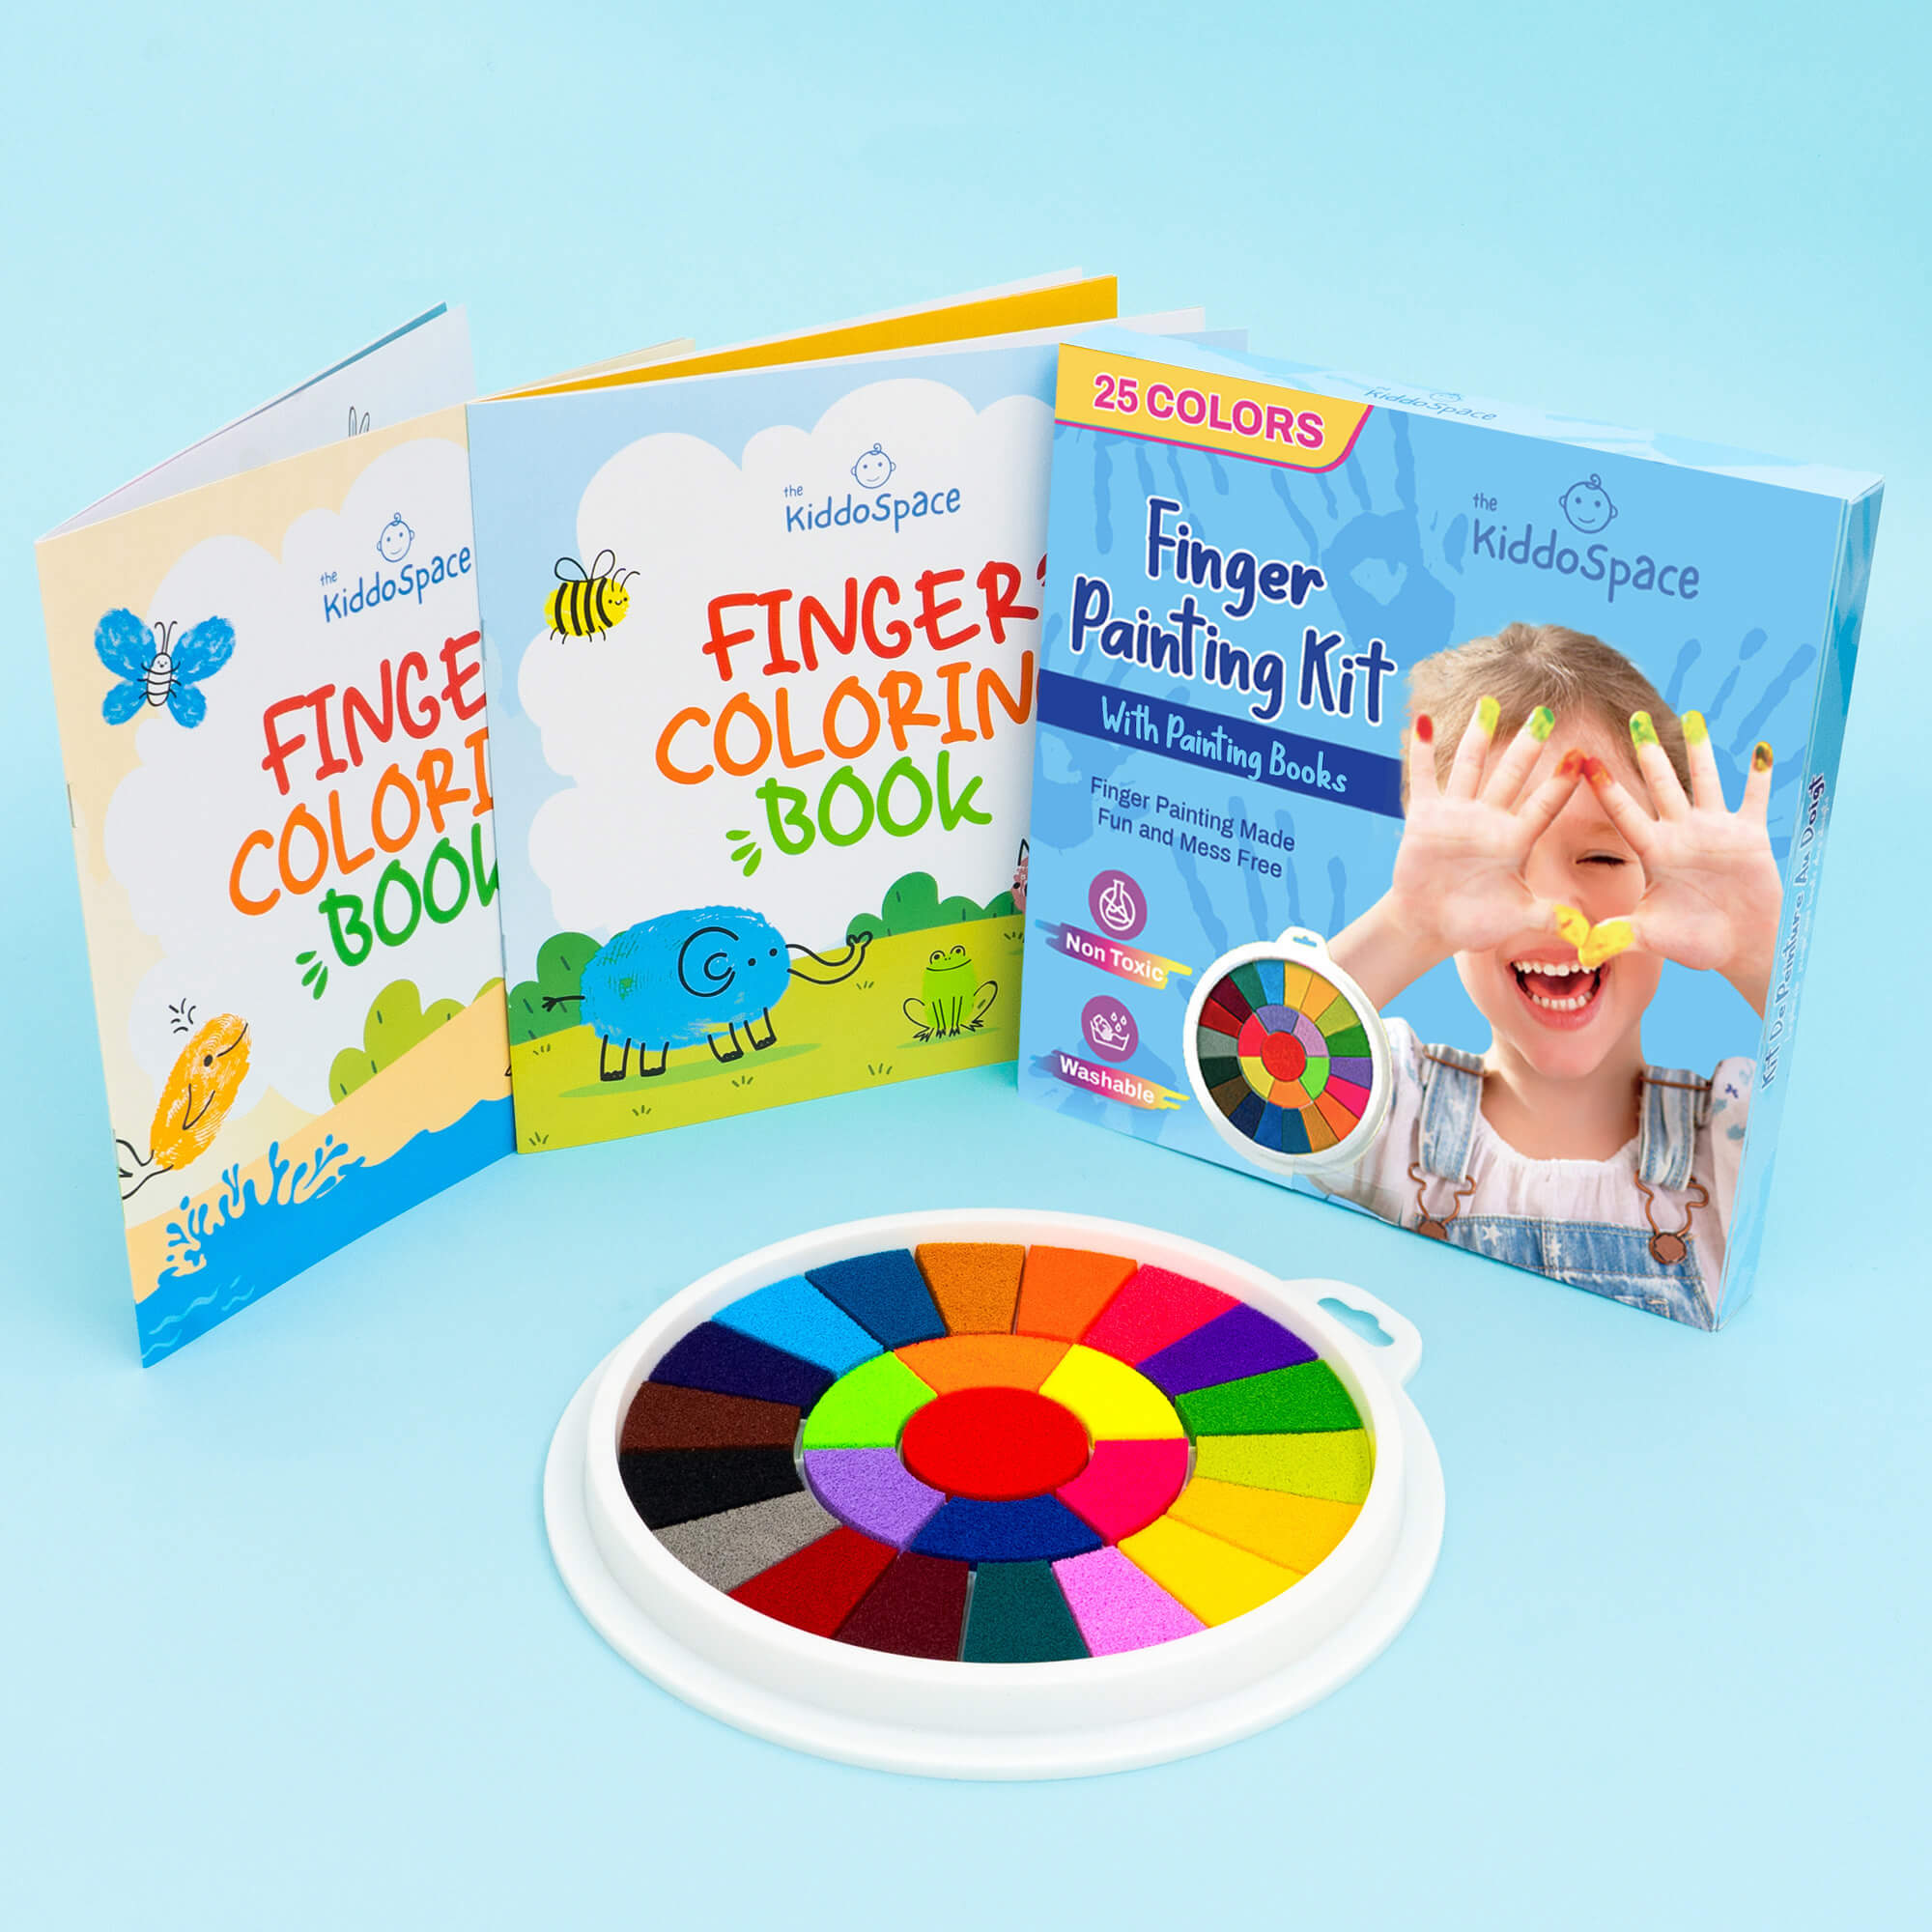 Watch Me Paint: Paint Famous Masterpieces with Just Your Finger!: Color-Changing Fun for Bath Time and Play Time! [Book]